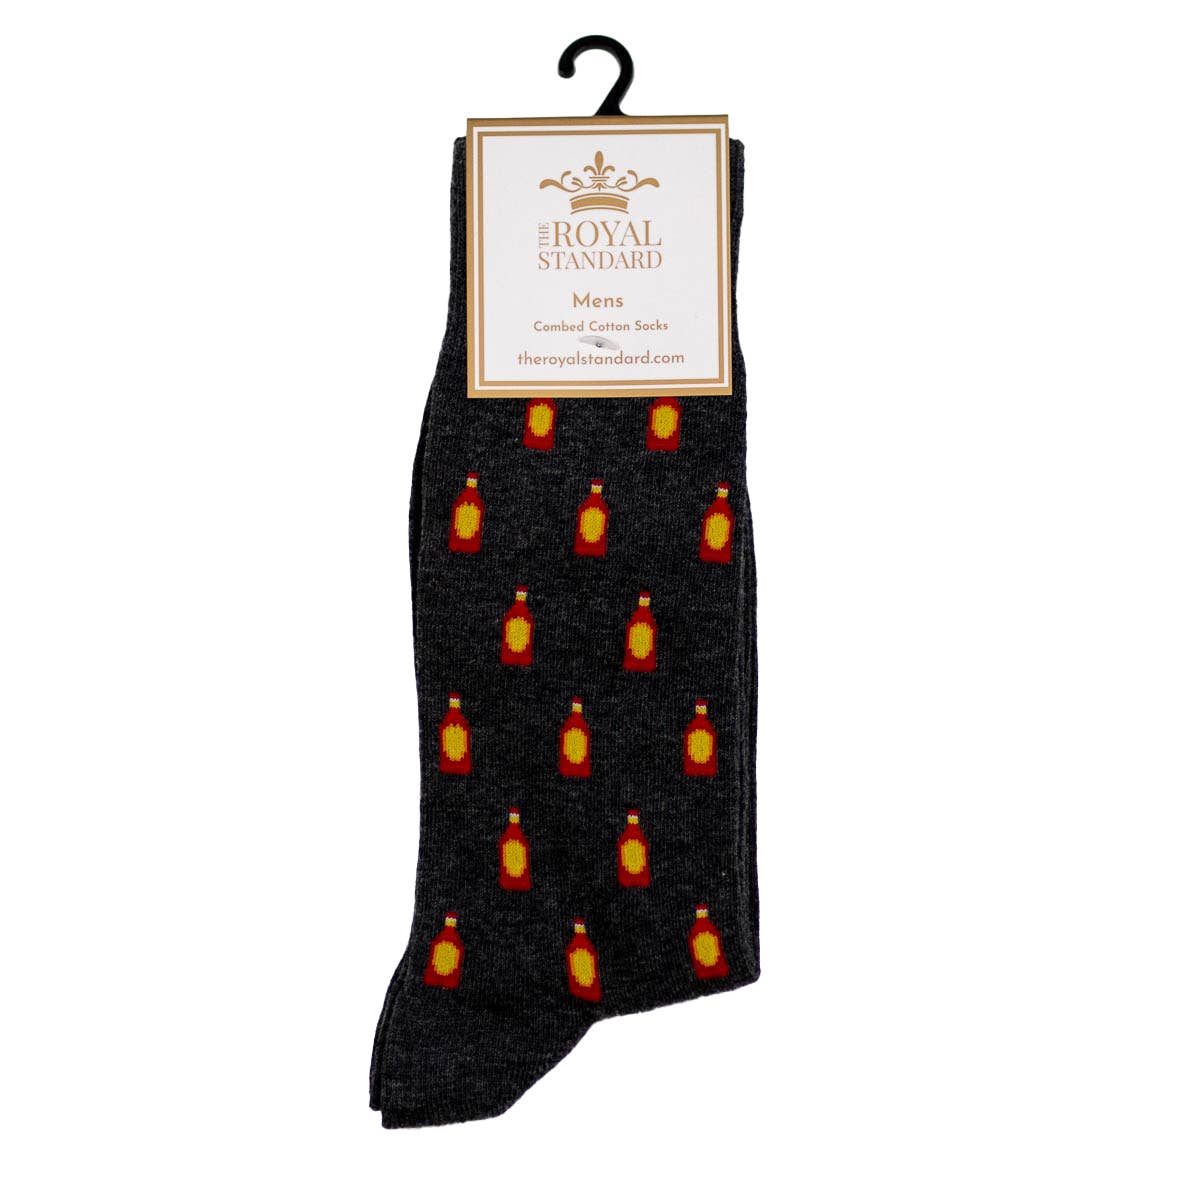 Men's Hot Sauce Socks   Charcoal/Red/Yellow   One Size